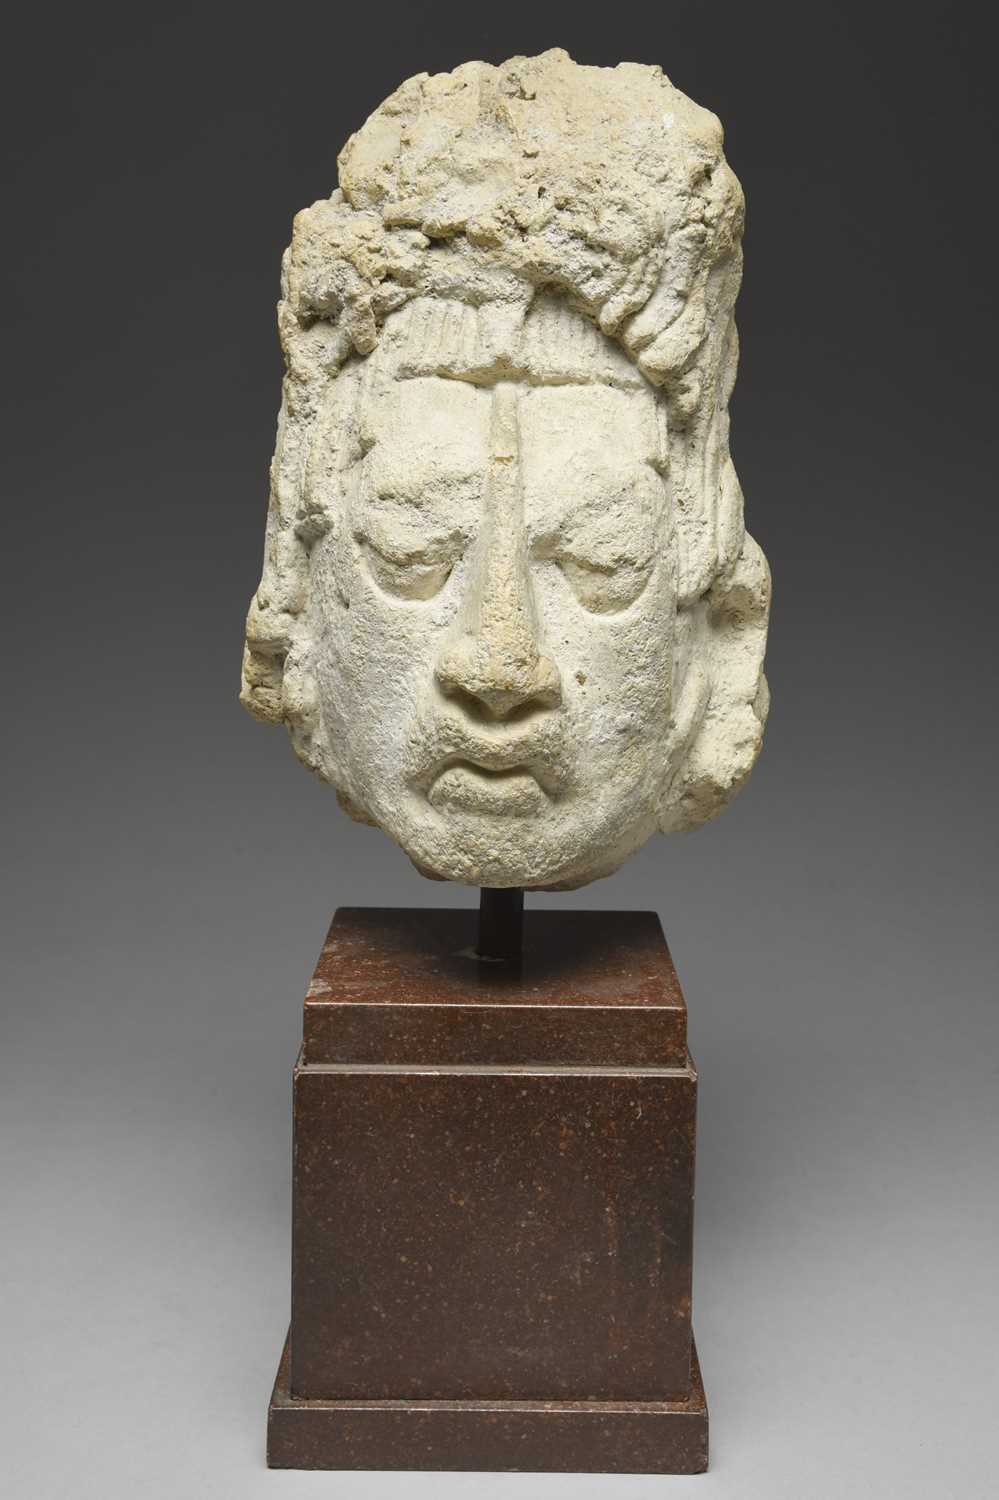 A Maya stucco headMexico, circa 250 - 750 ADthe finely modelled face with a roughly modelled